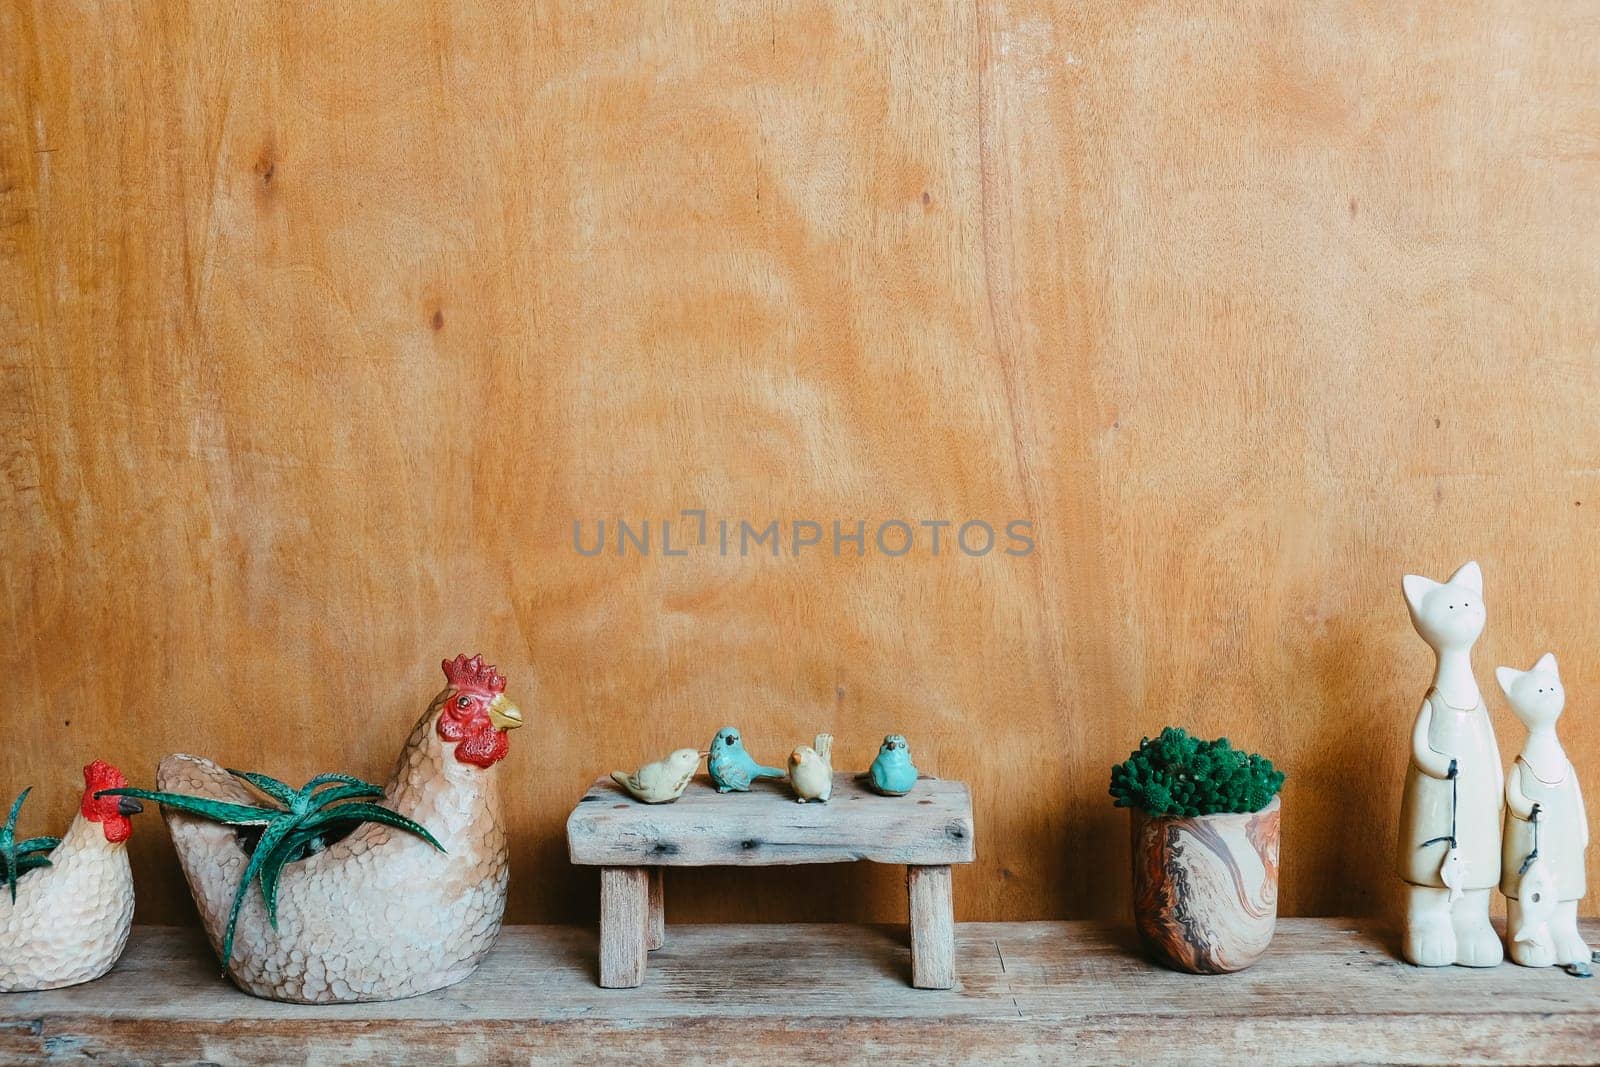 Still life image of Wooden bench and small birds with plant pot on wooden background.